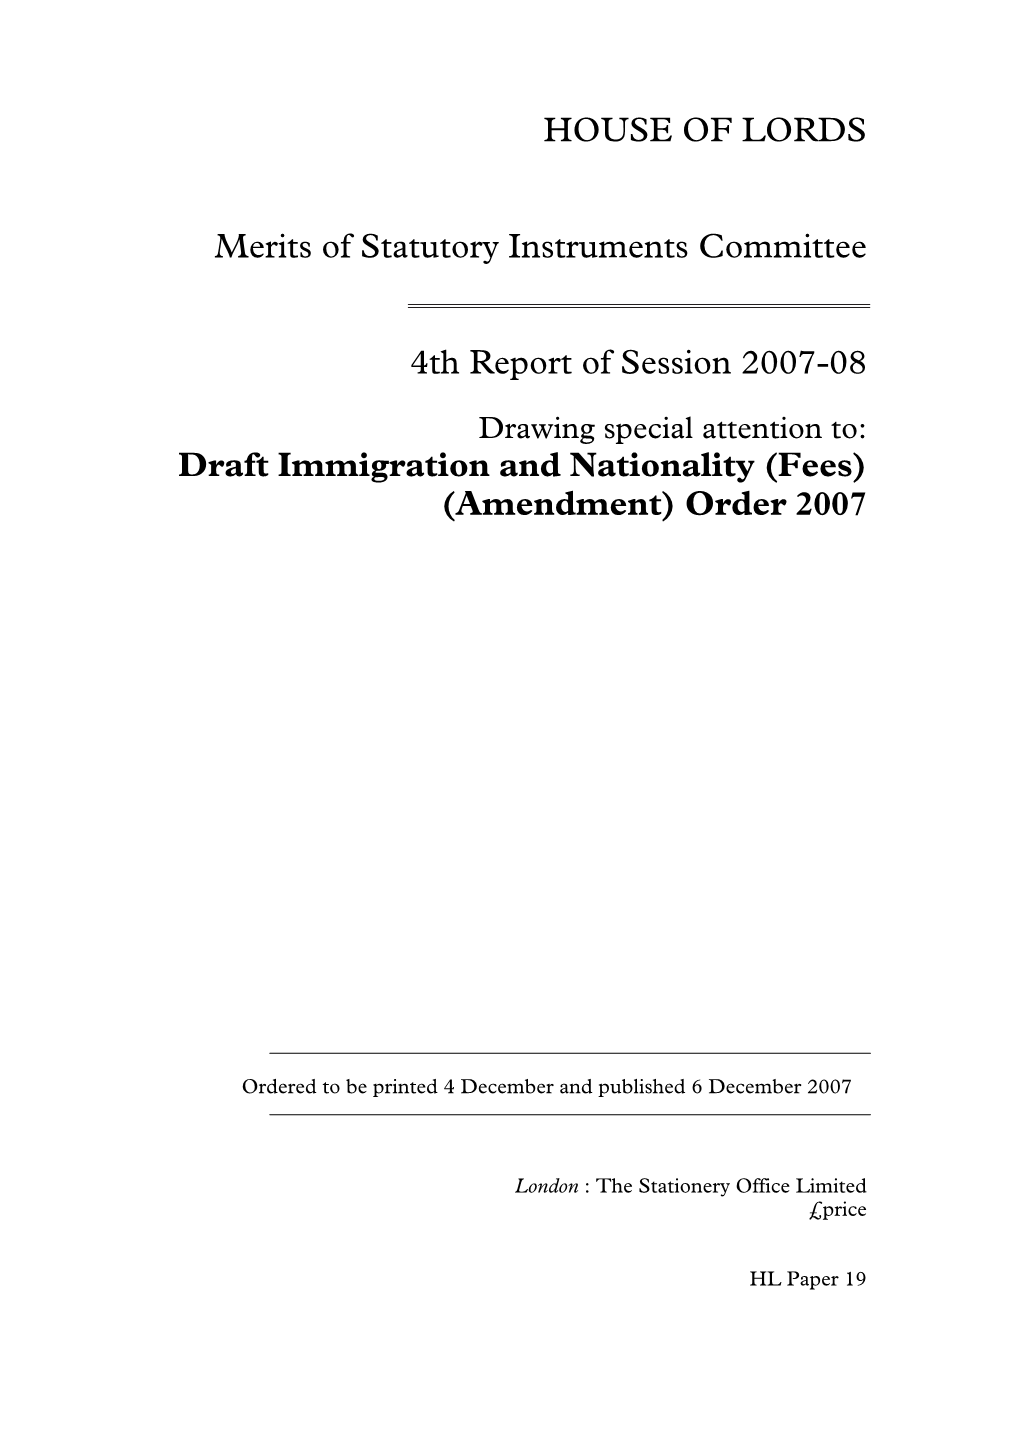 HOUSE of LORDS Merits of Statutory Instruments Committee 4Th Report of Session 2007-08 Draft Immigration and Nationality